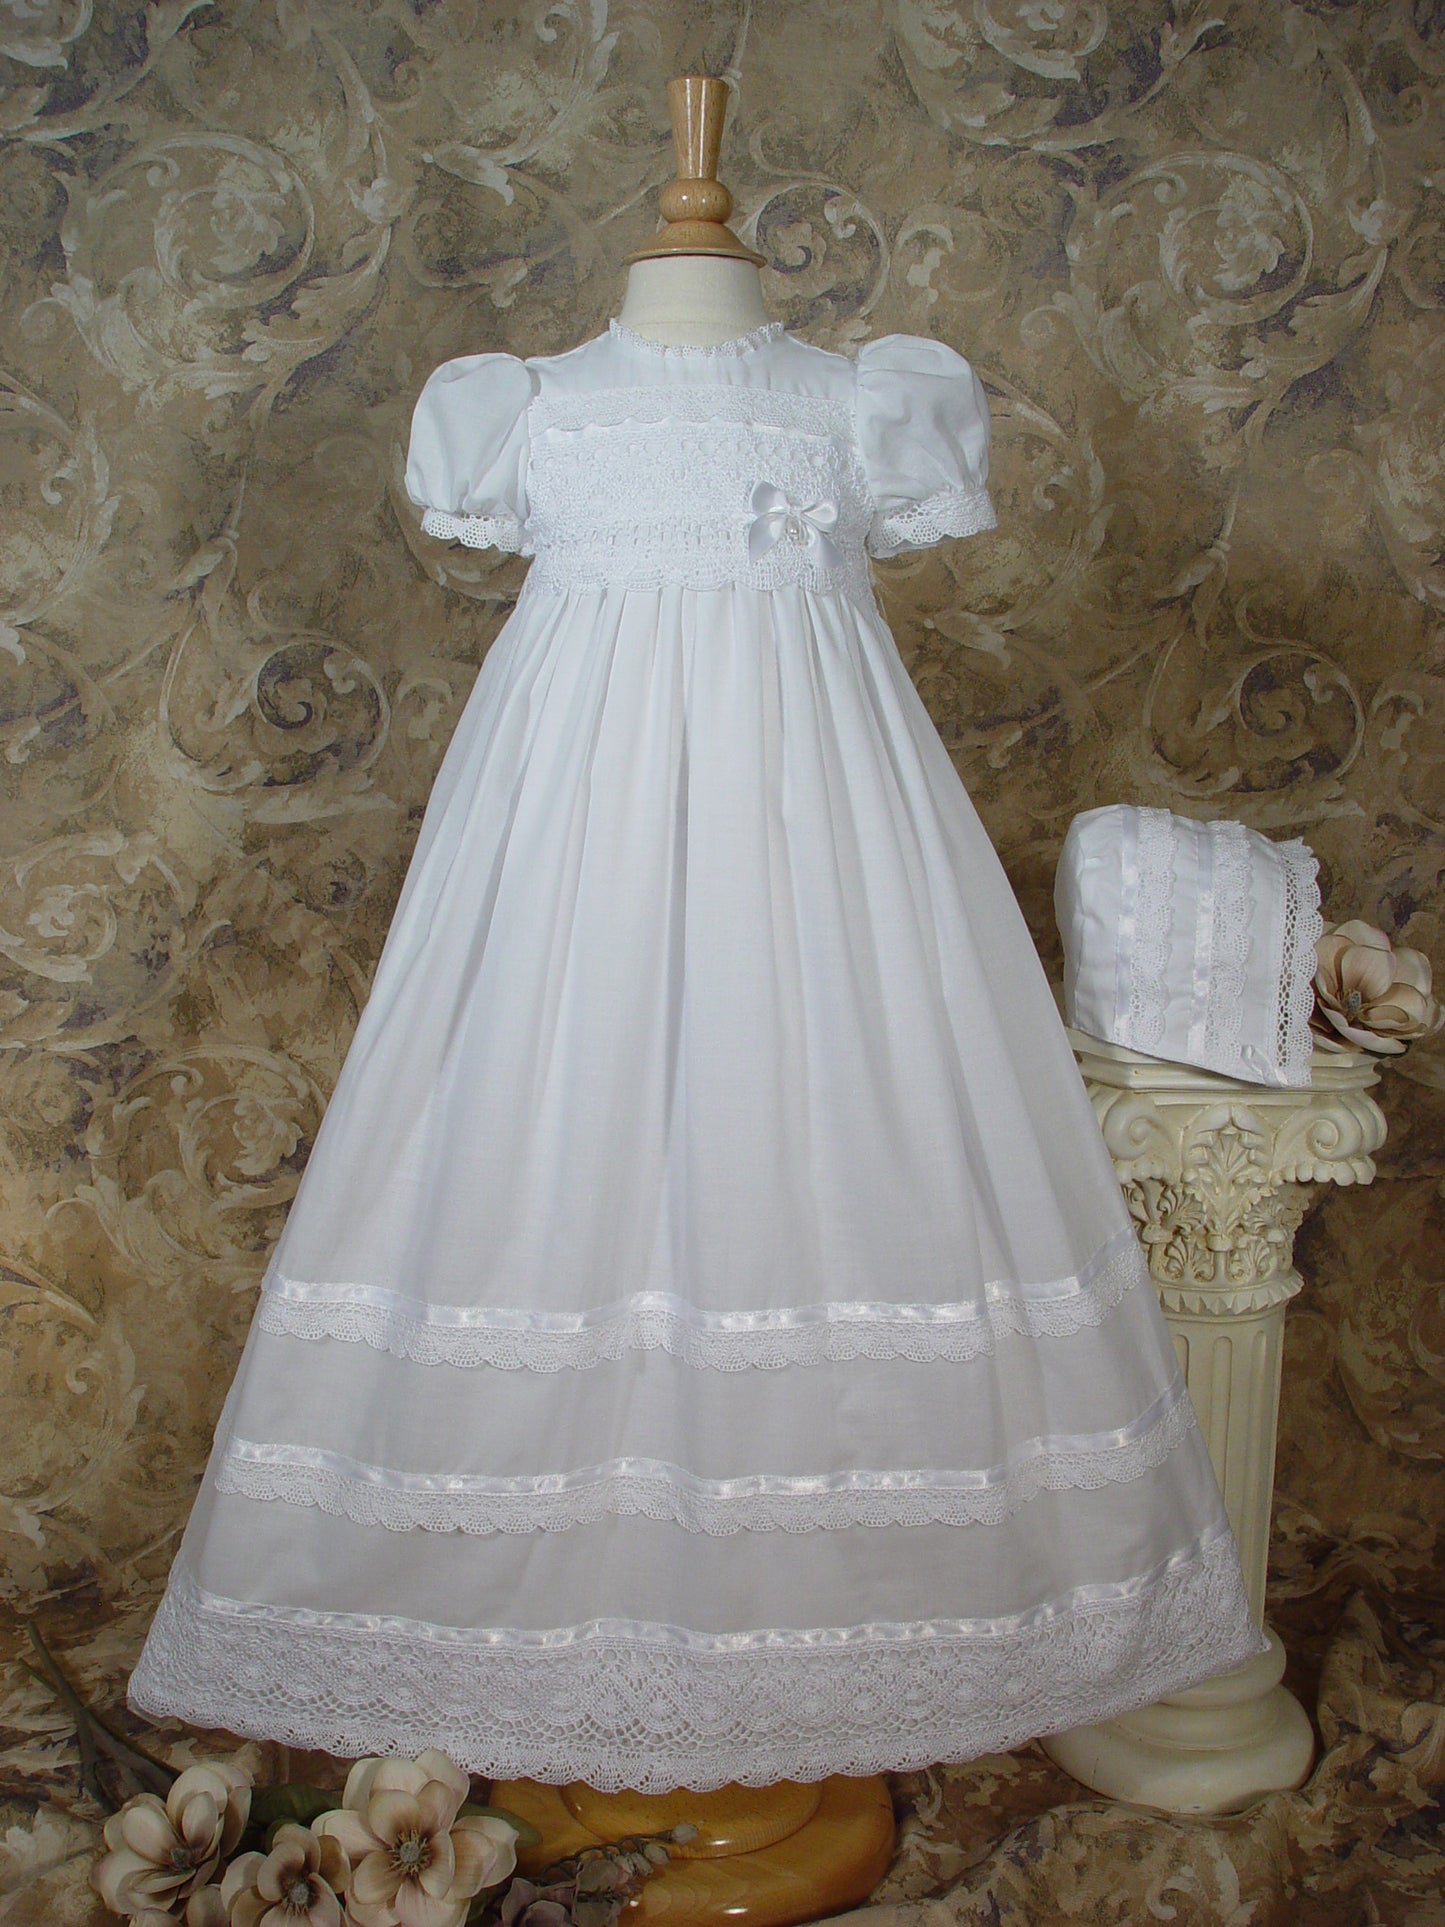 Girls Cotton Short Sleeve Dress Christening Baptism Gown with Lace and Ribbon (CA25GS)